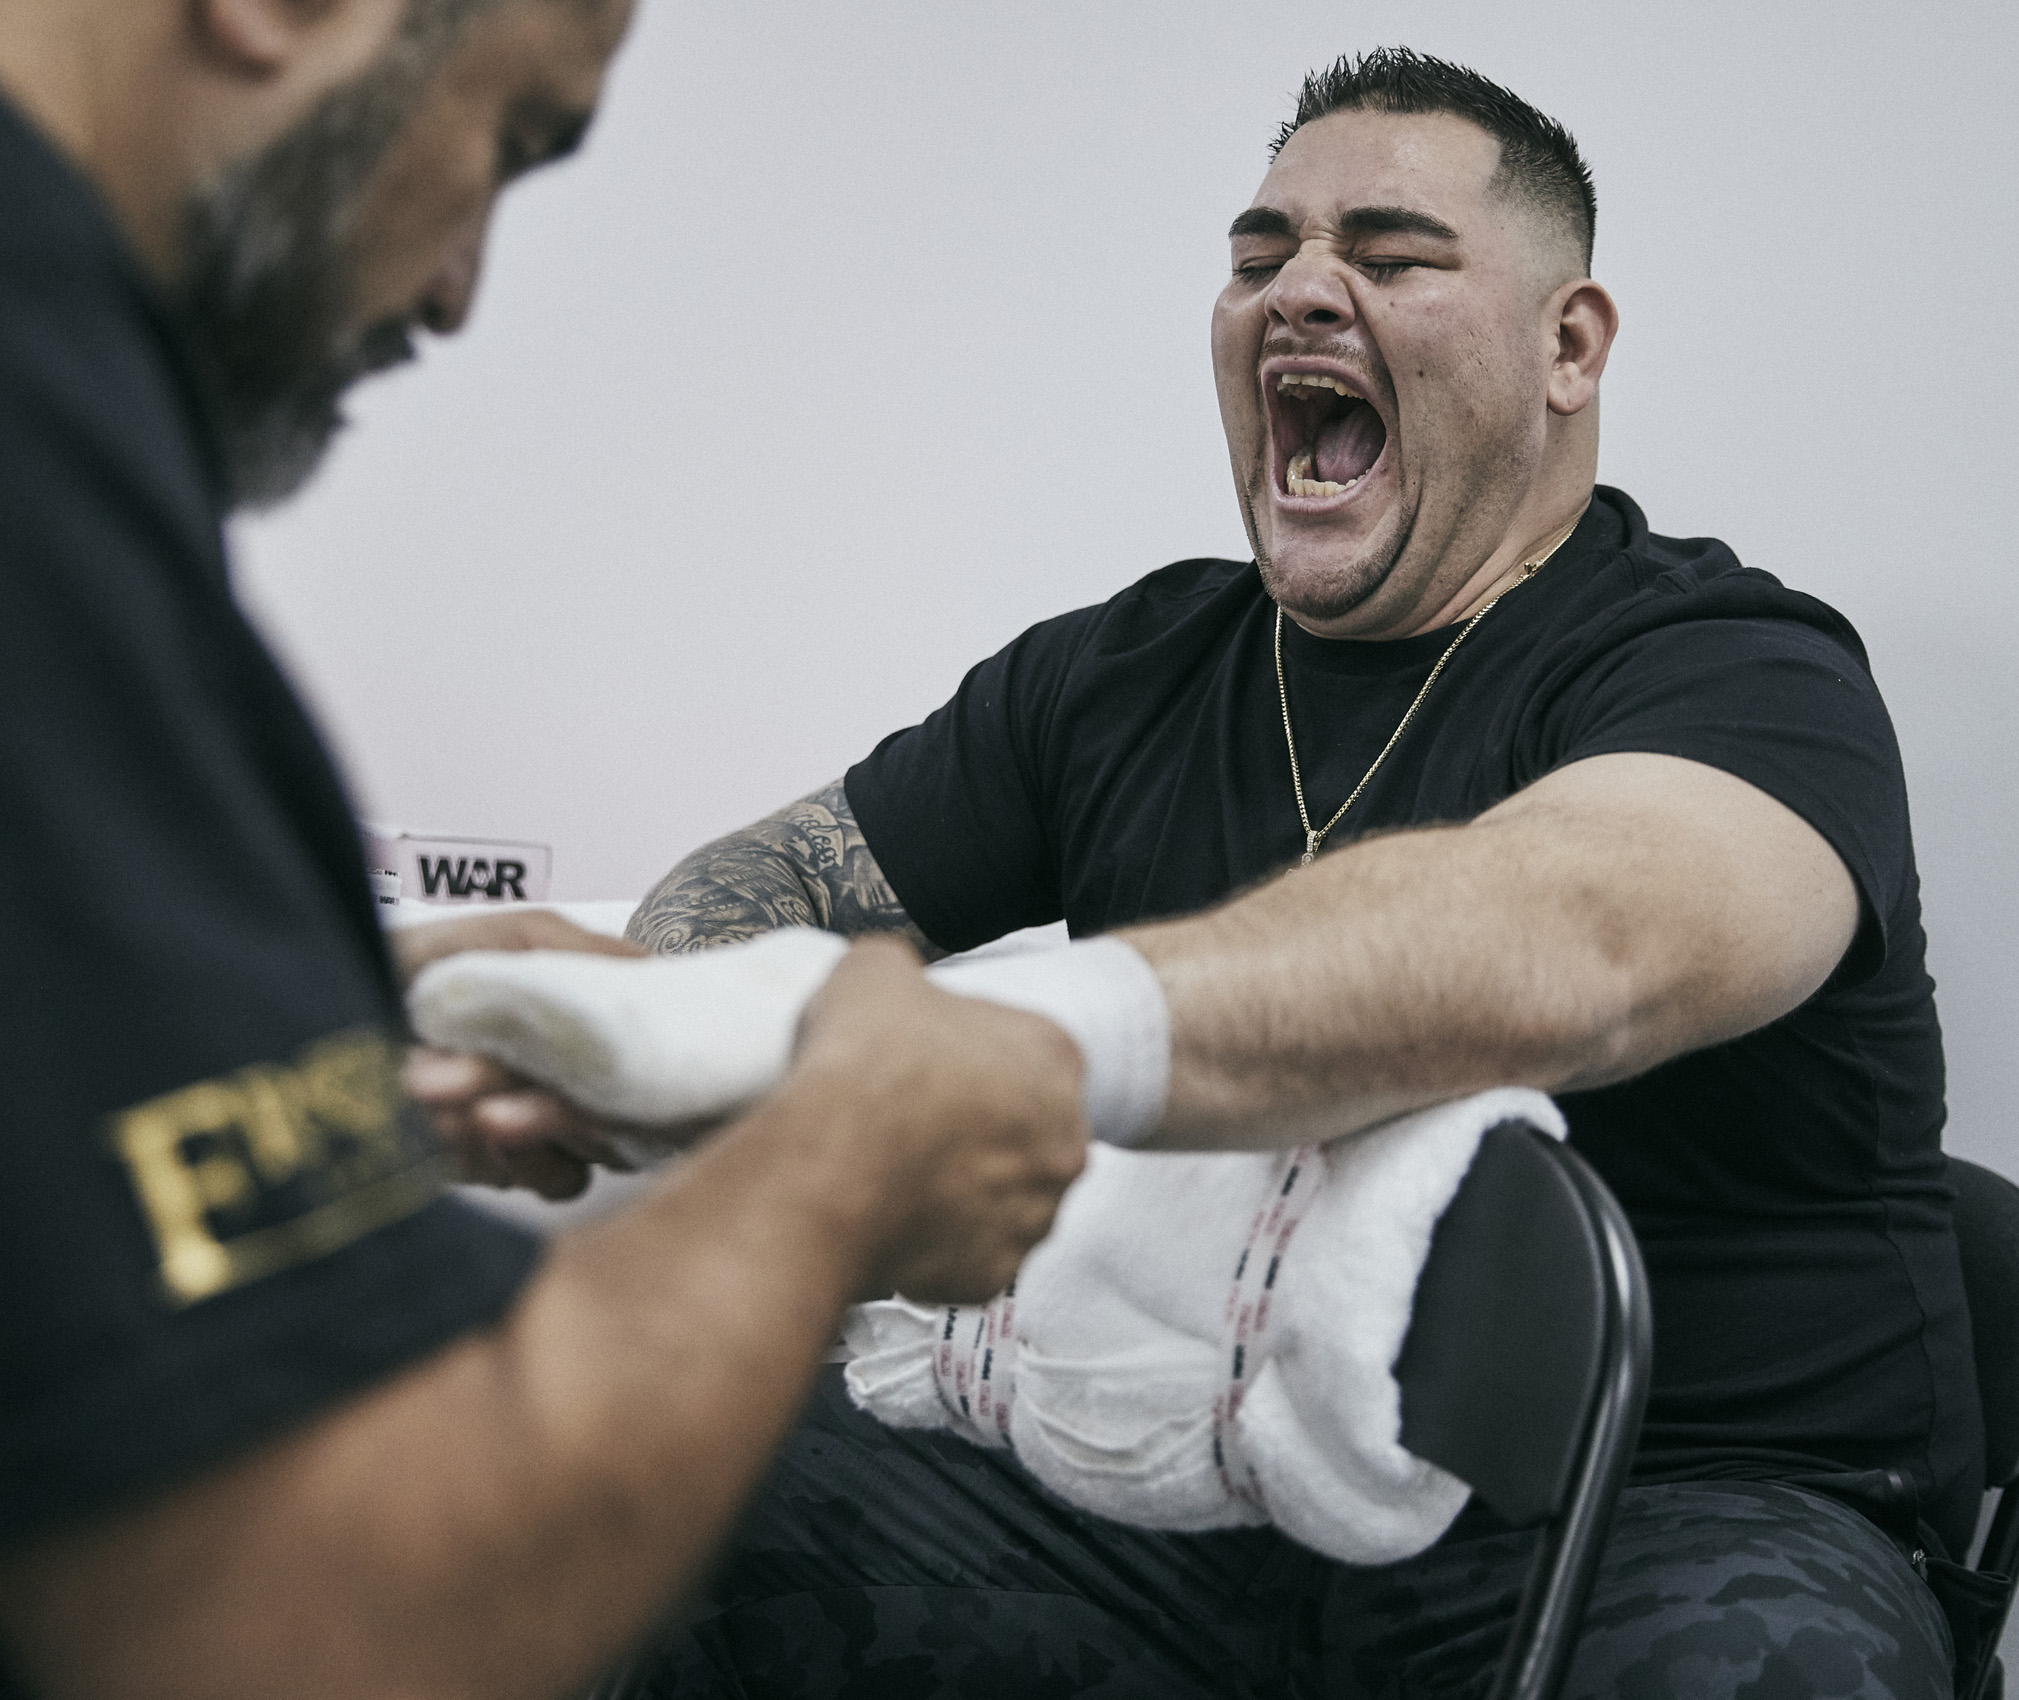 Andy Ruiz Jr Hands Wrapped Dressing Room Backstage © Mark Robinson Photographer Matchrrom Boxing 2019.